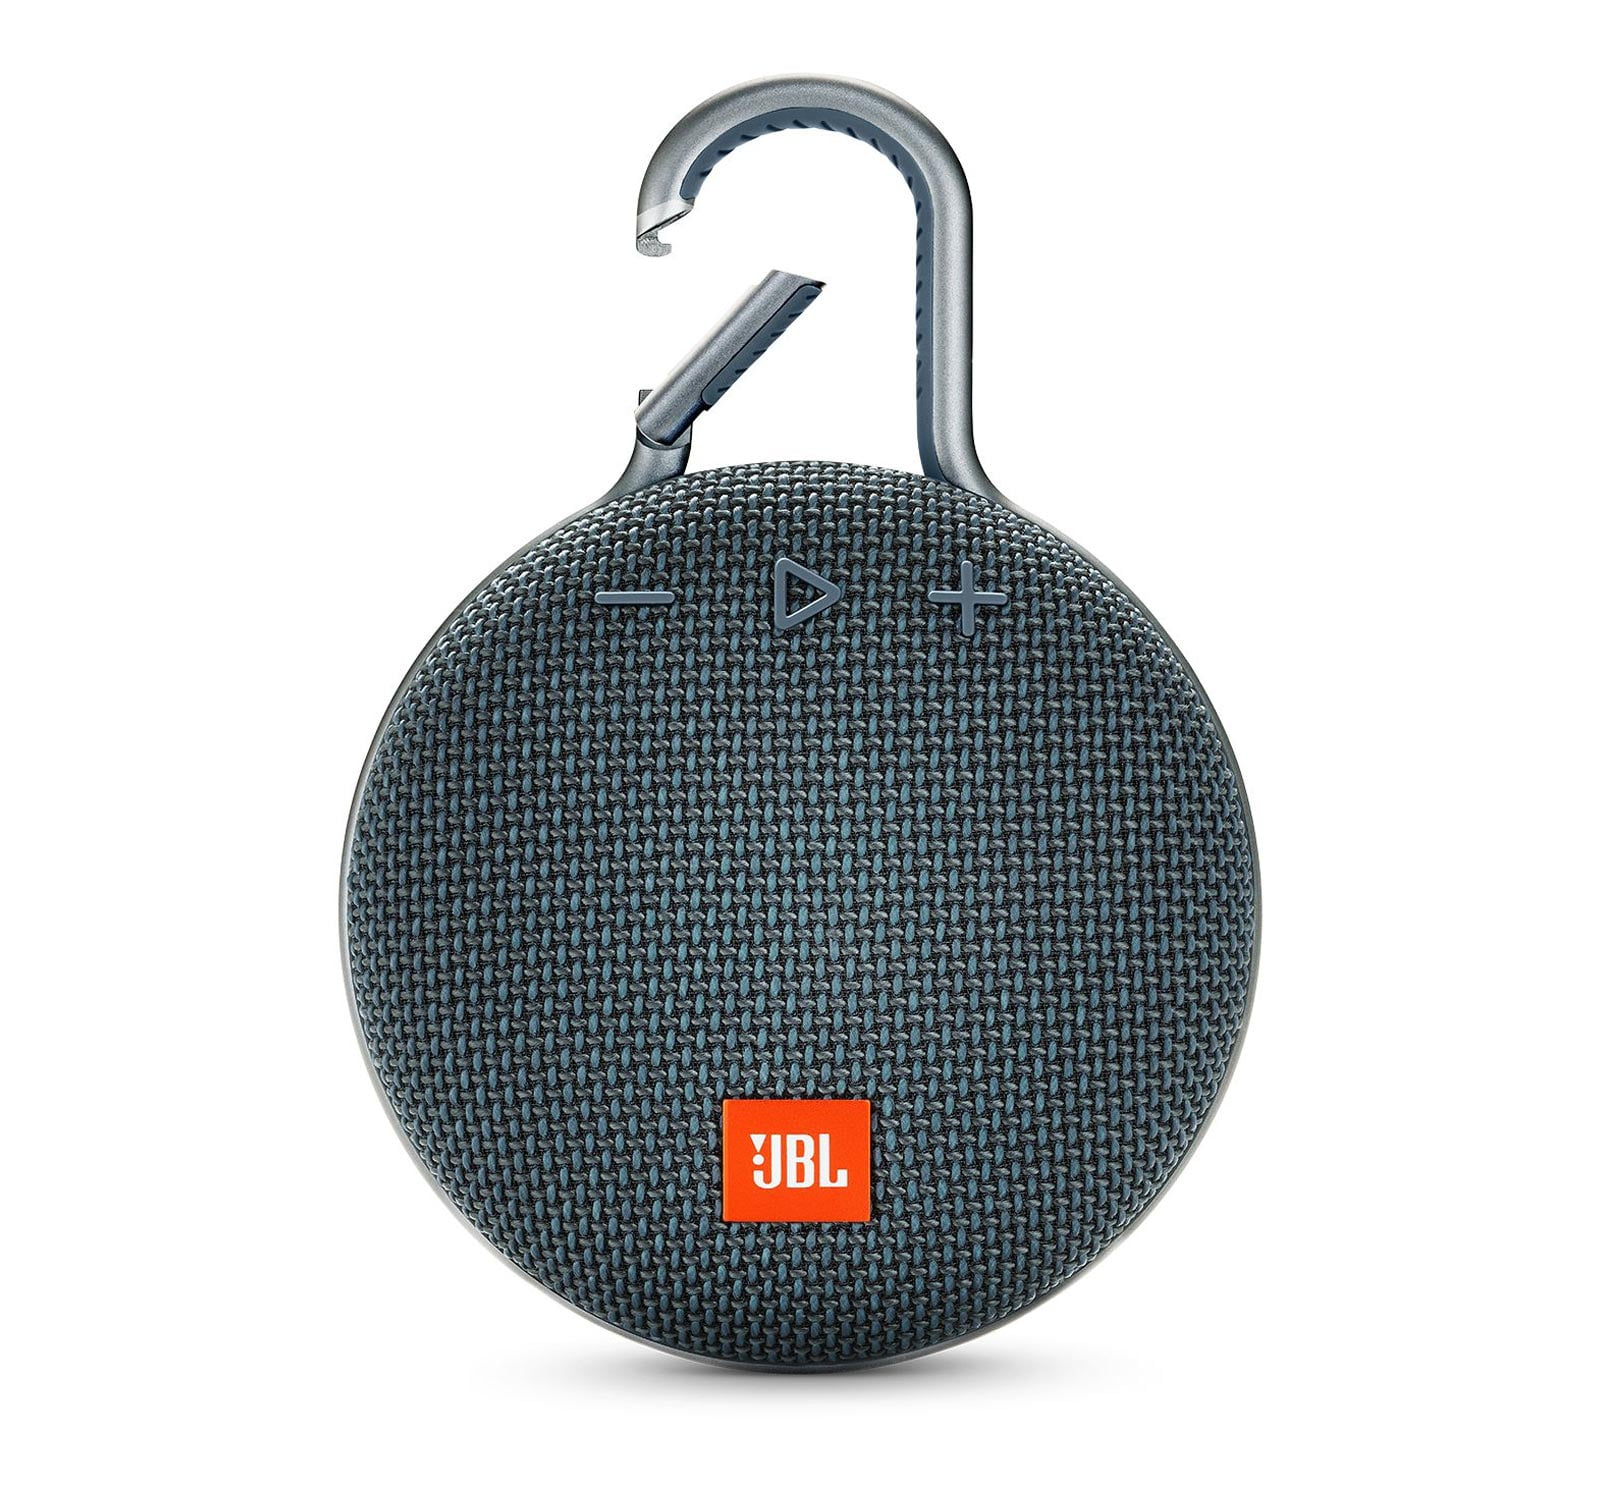 JBL Clip 3 Portable Bluetooth Speaker with Carabiner - Gray 